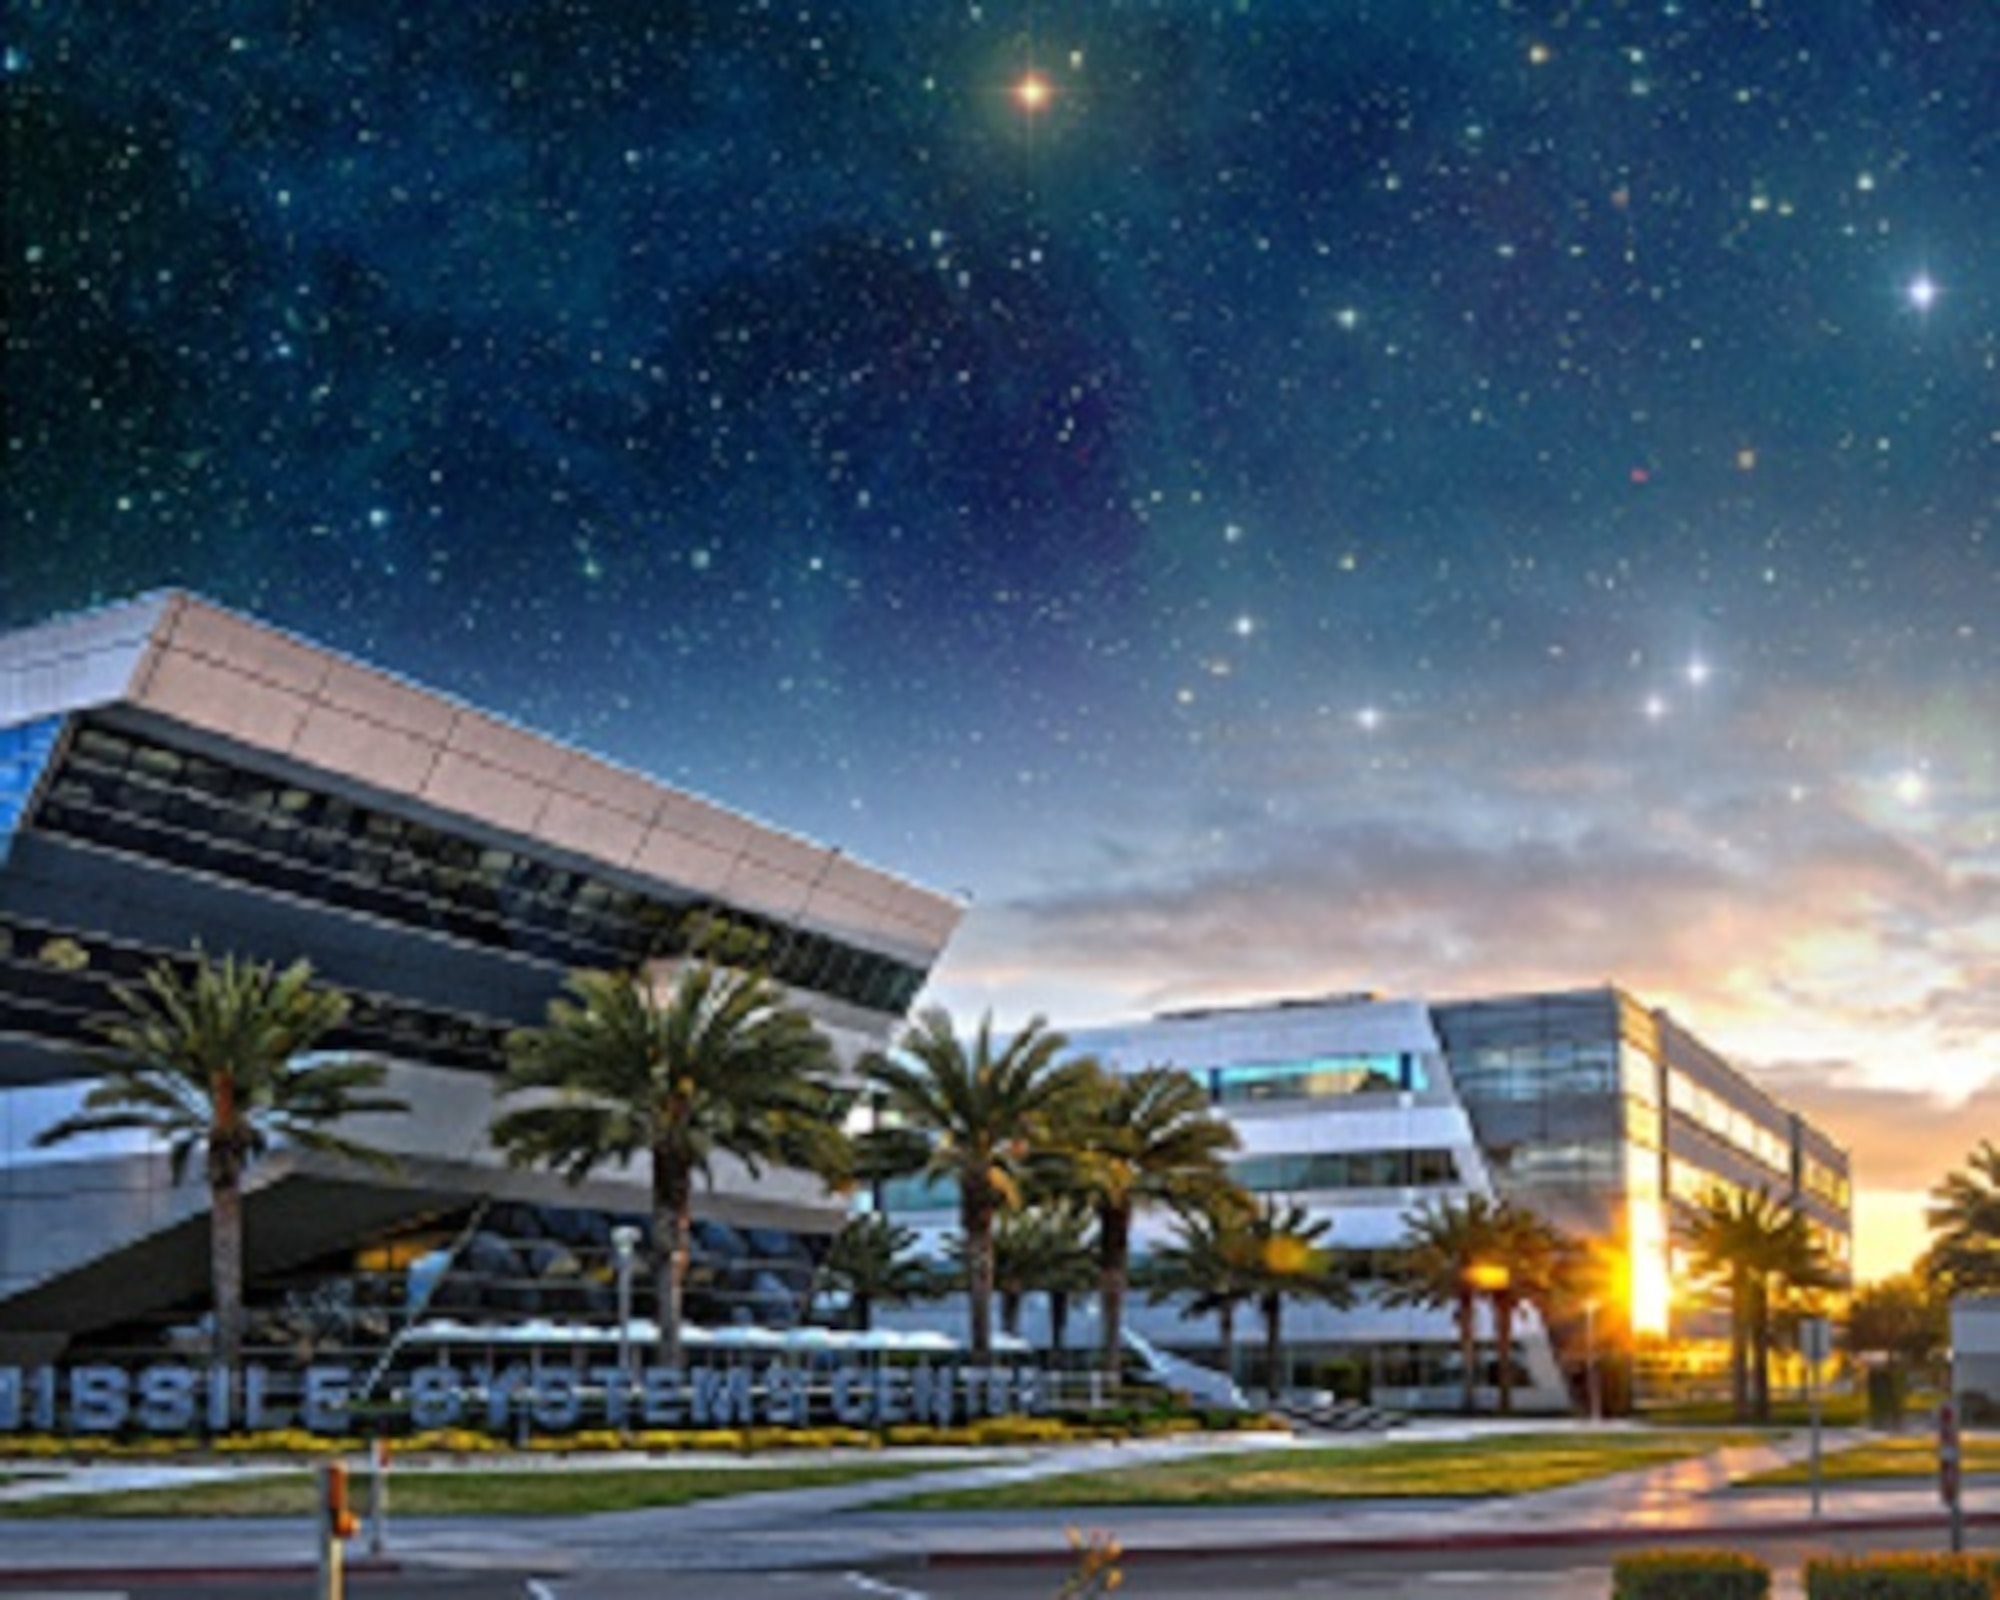 Space and Missile Systems Center at Los Angeles Air Force base in El Segundo, Calif. with star field superimposed